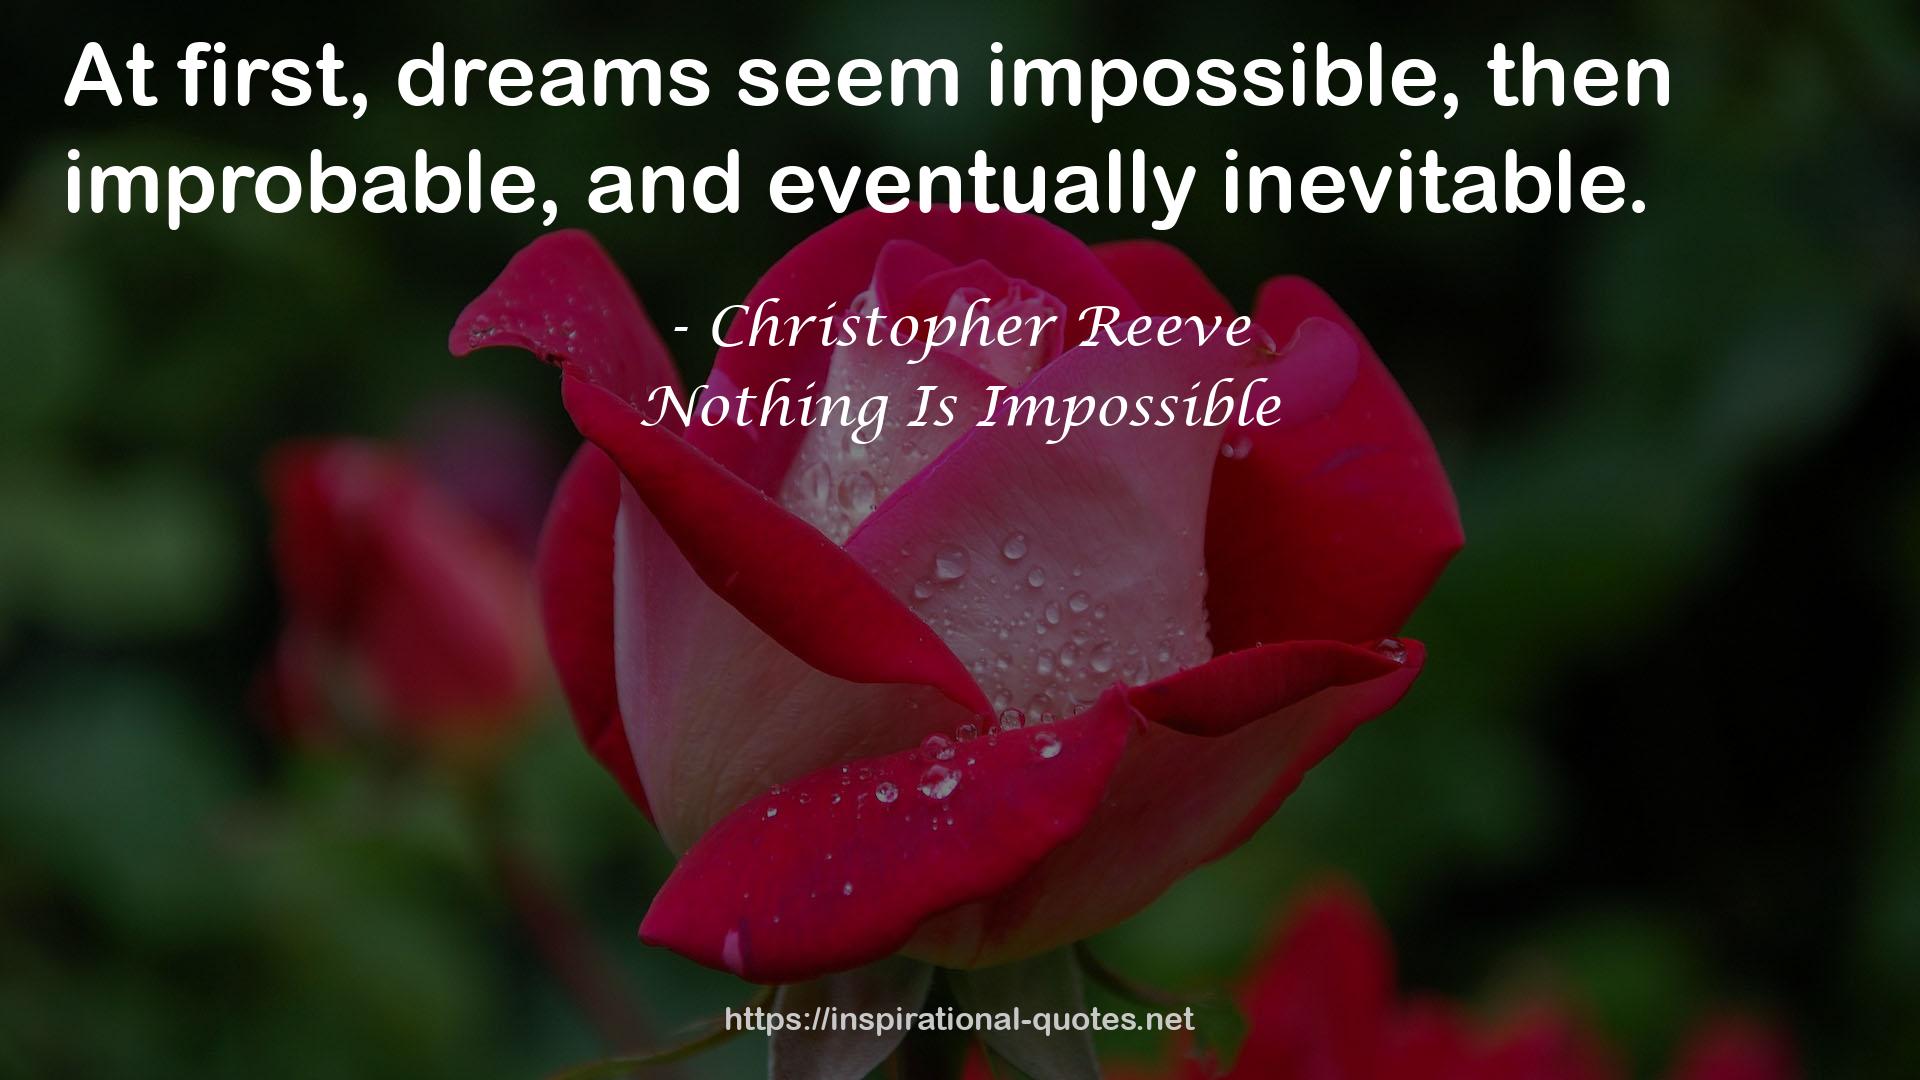 Nothing Is Impossible QUOTES